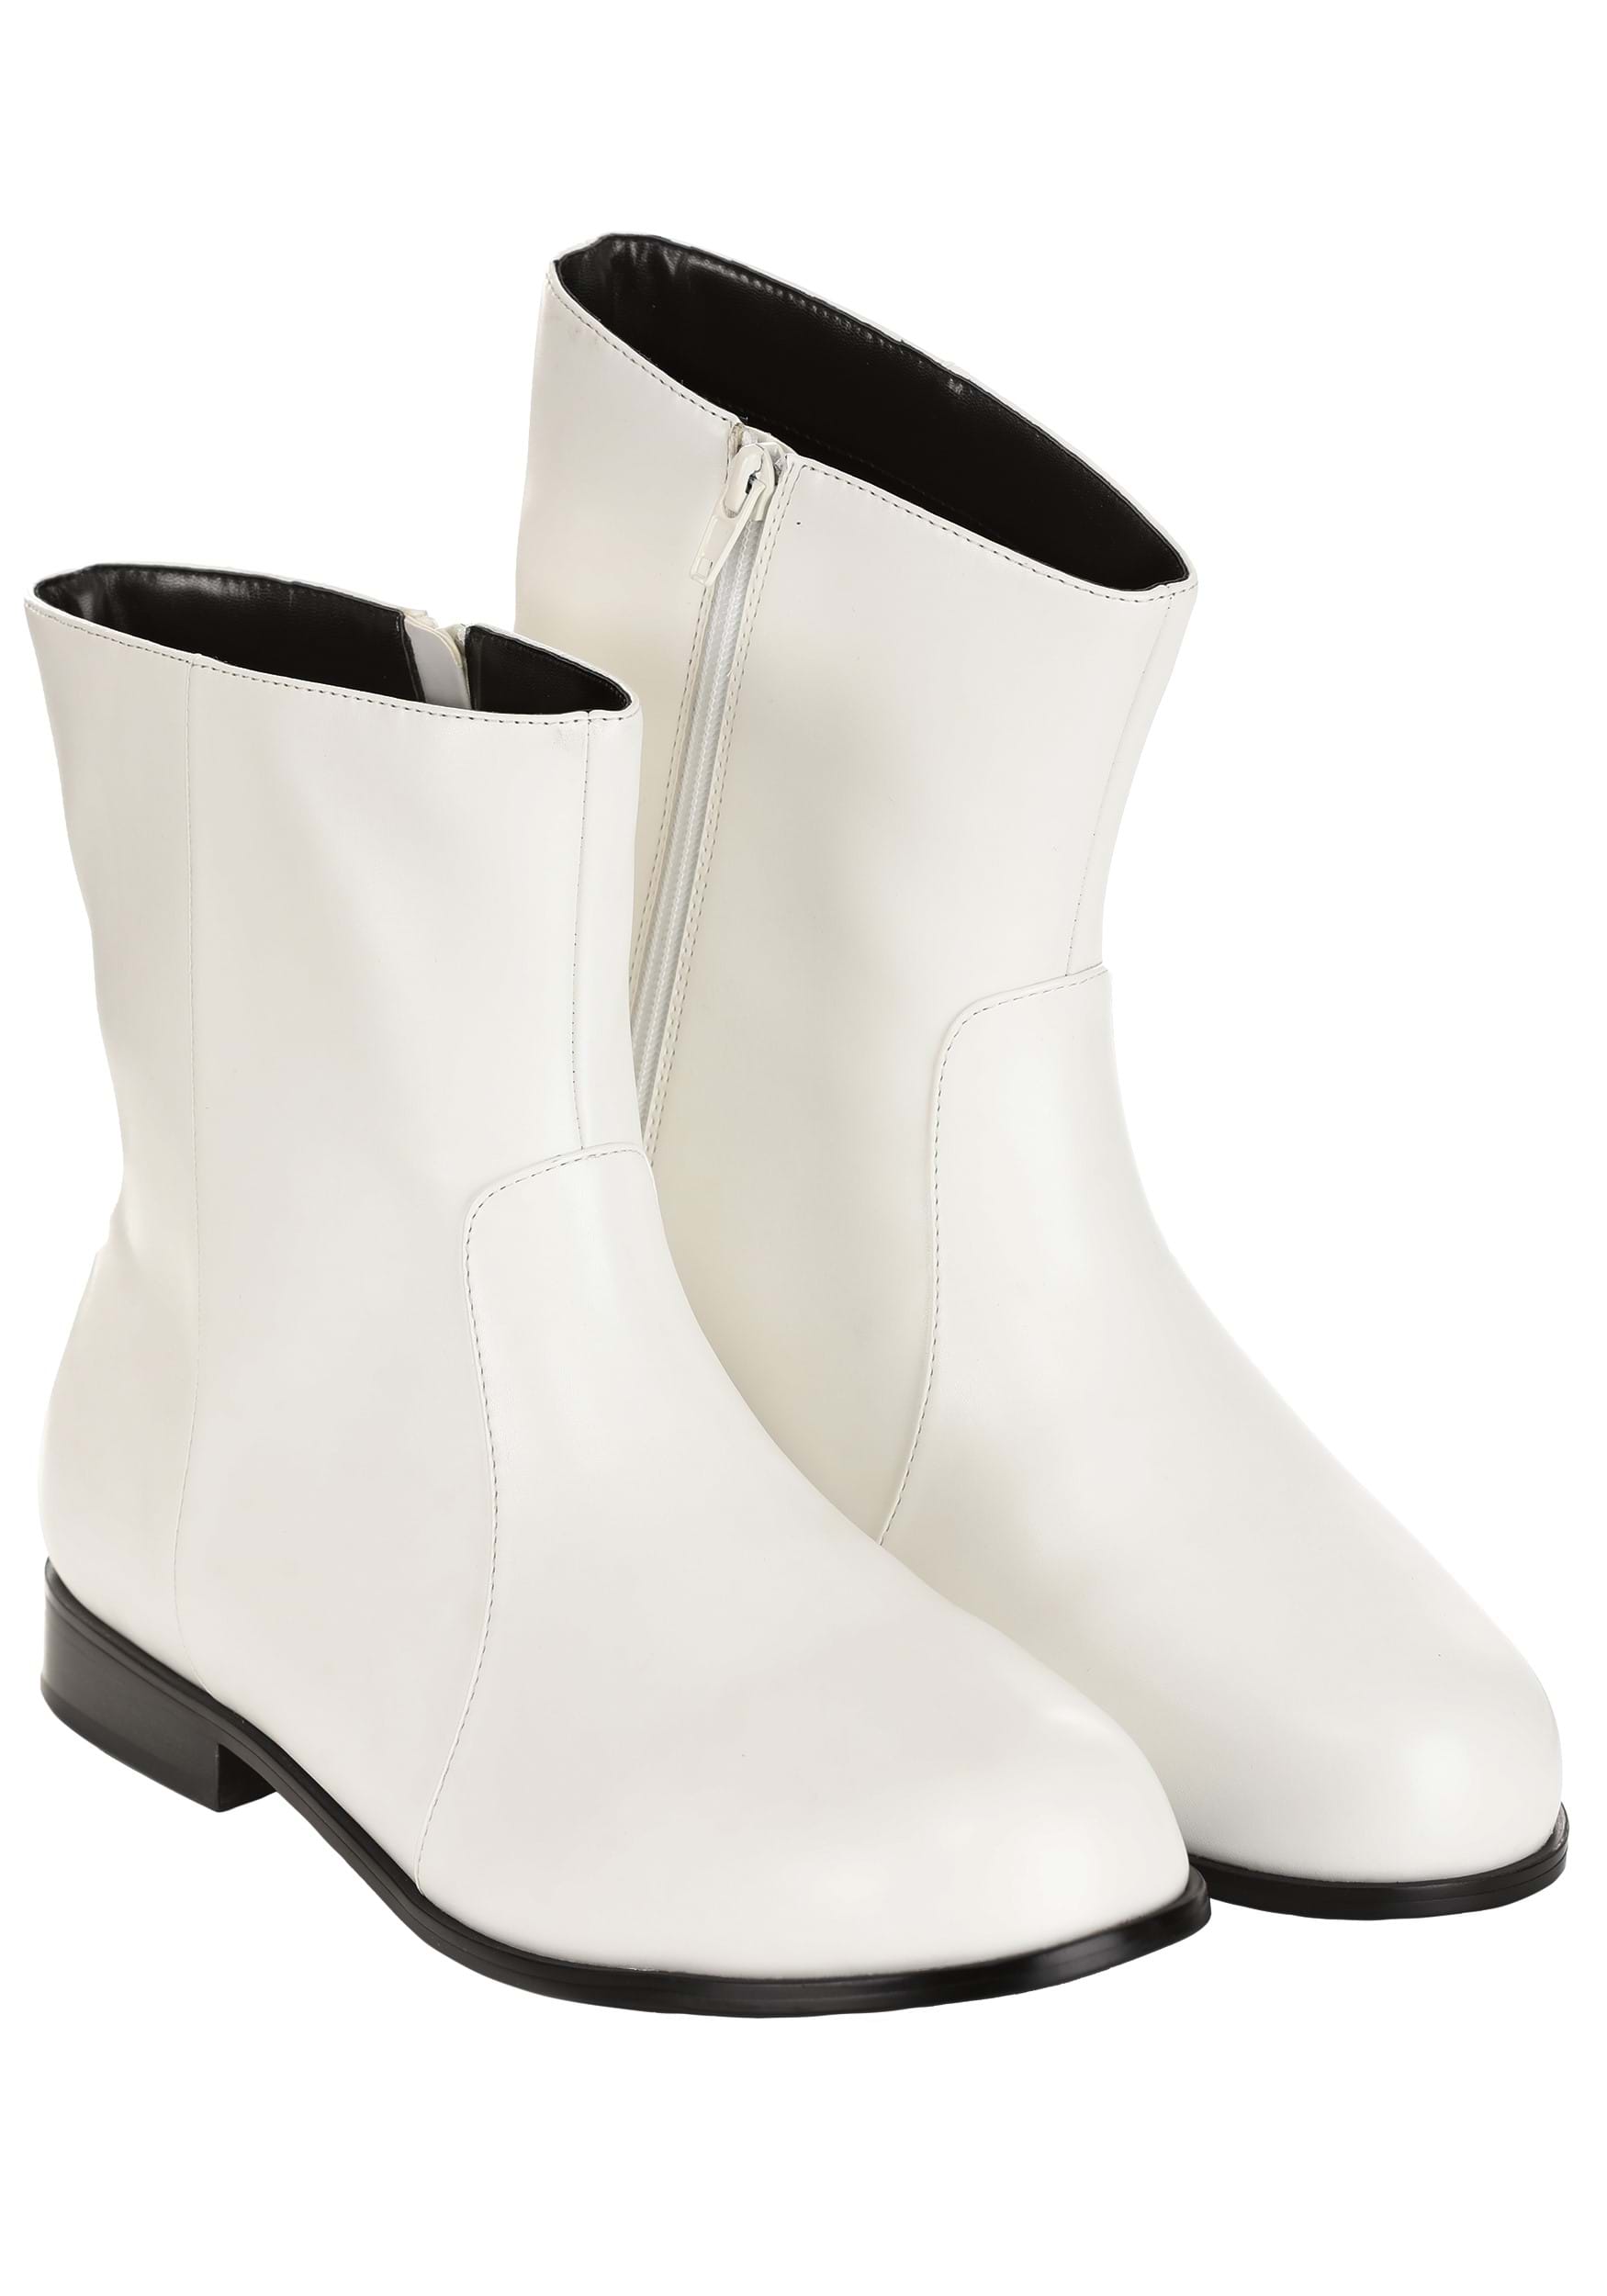 Adult White Boots